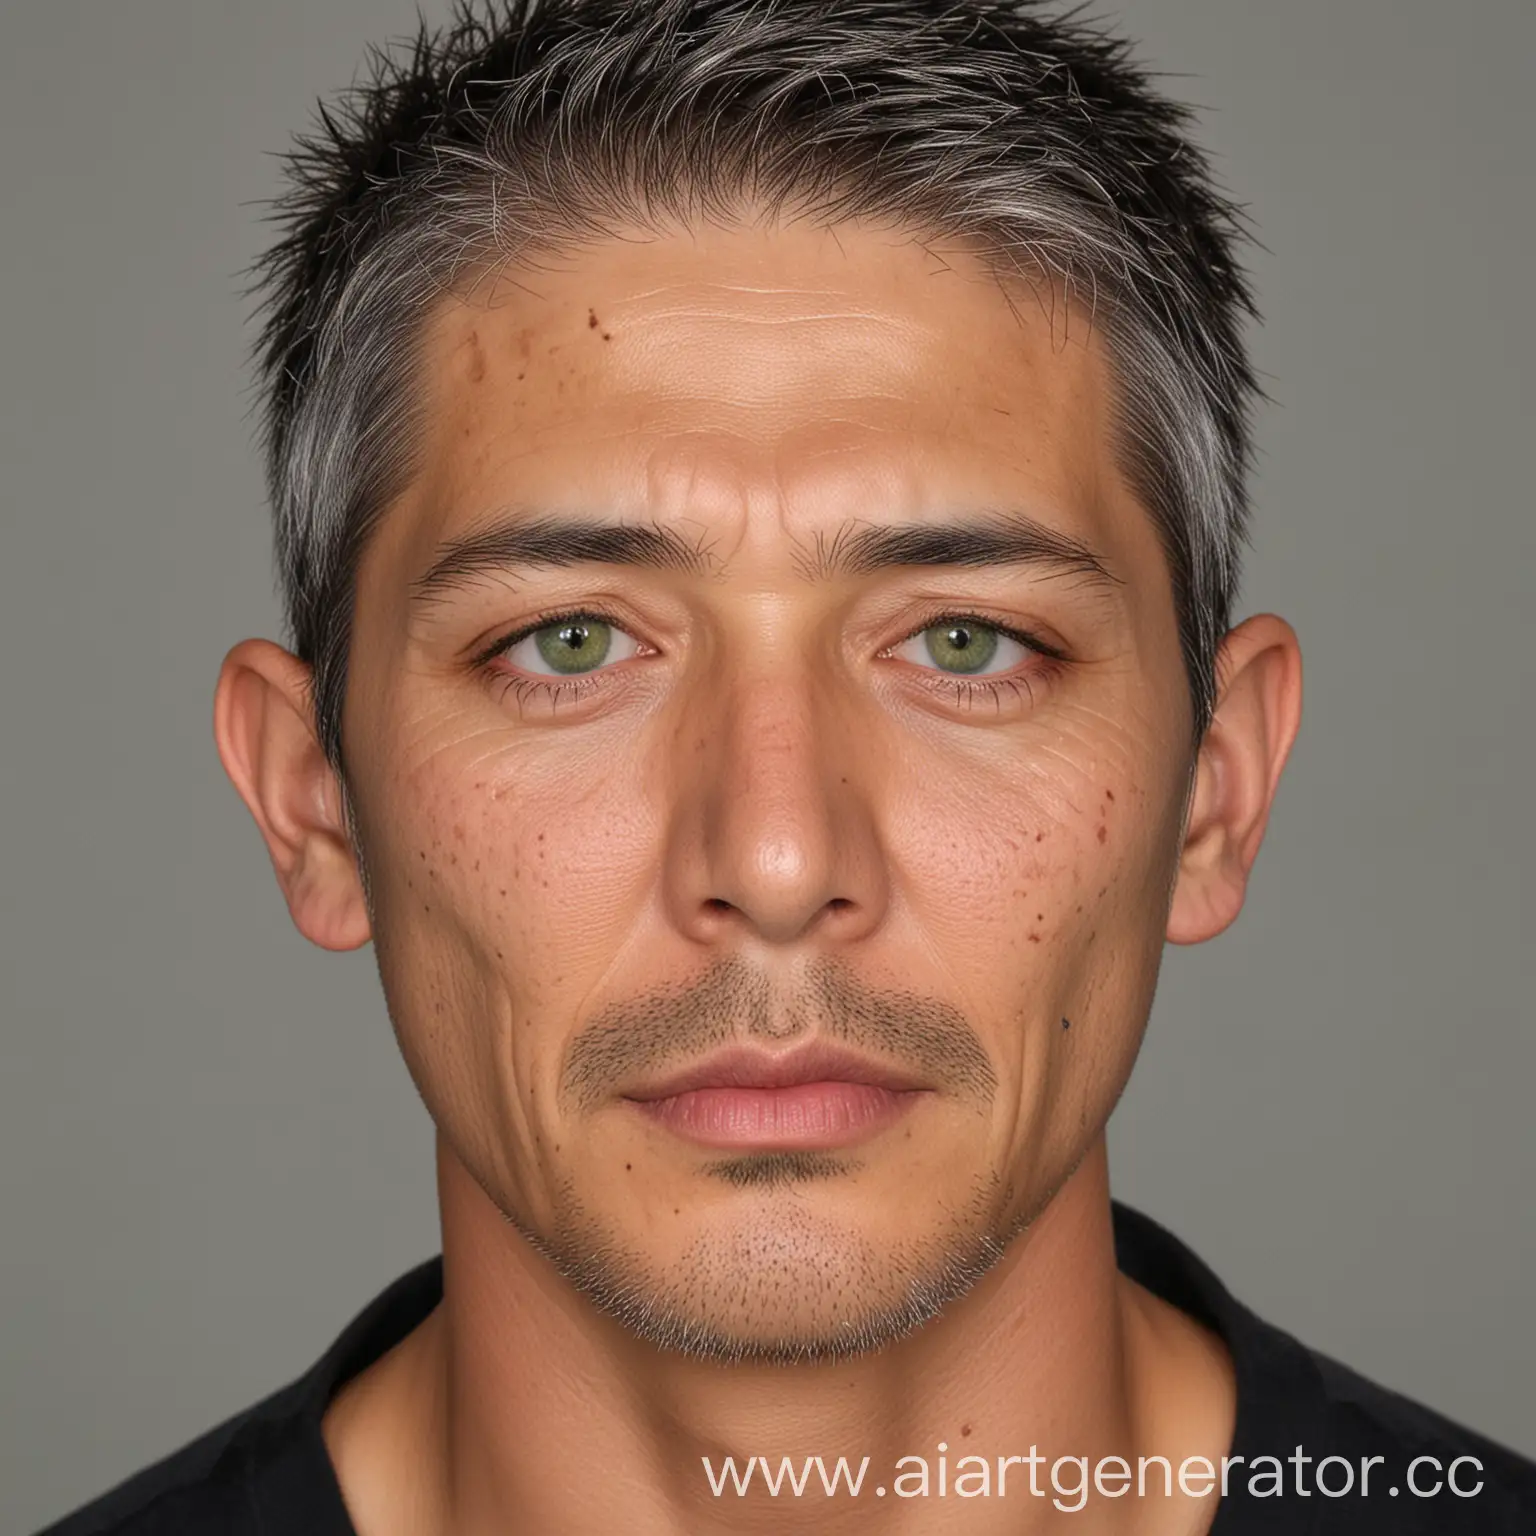 Asian-Man-with-Scars-and-Green-Eyes-Portrait-of-a-Mature-Male-with-Unique-Features